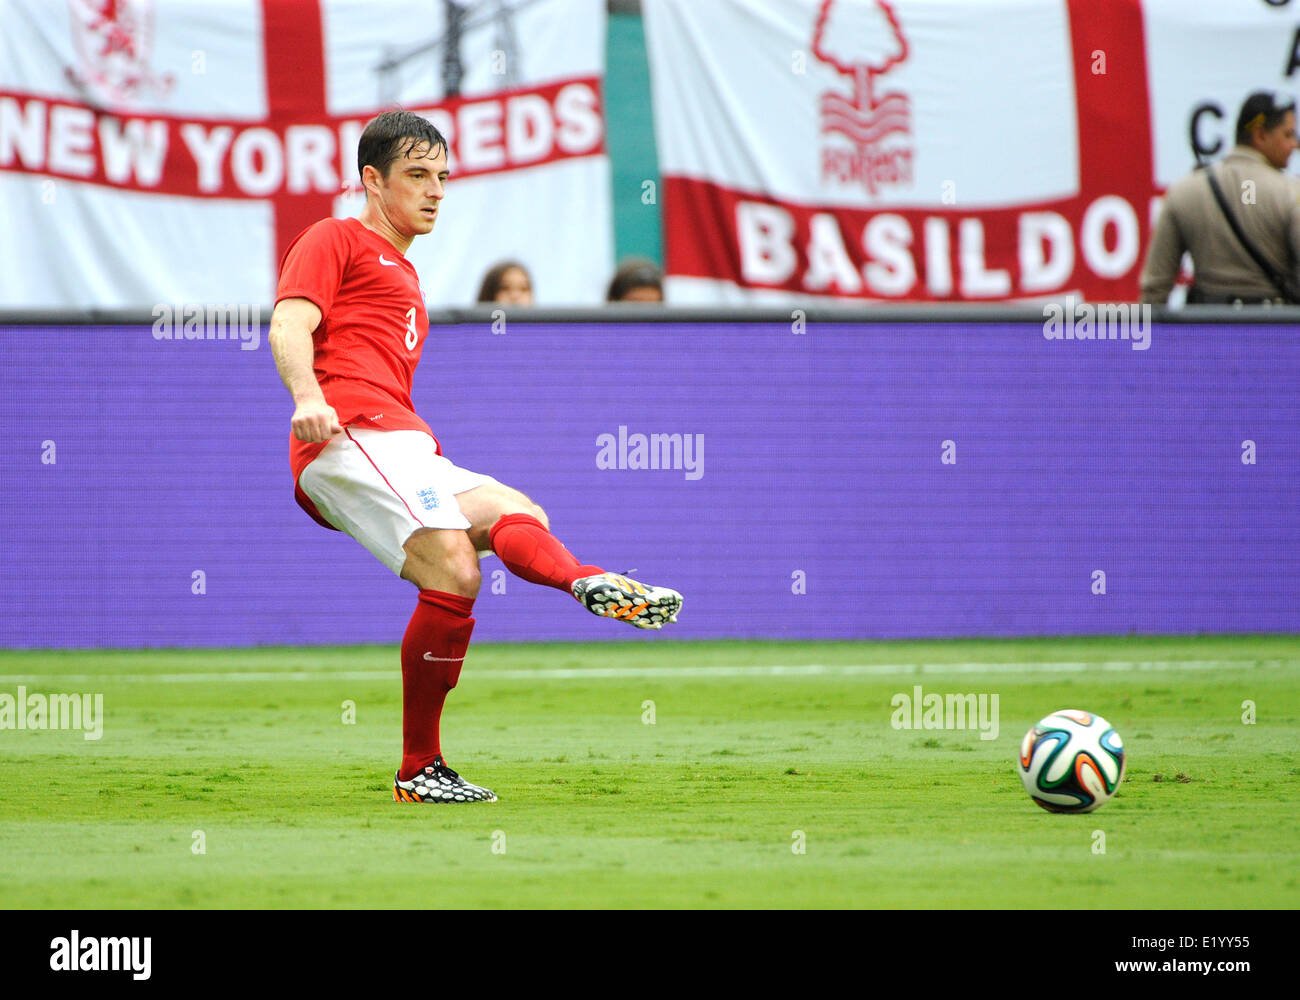 Florida, USA. 7th June, 2014. England Defender Leighton Baines (3) during an international friendly world cup warm up soccer match between England and Honduras at the Sun Life Stadium in Miami Gardens, Florida. © Action Plus Sports/Alamy Live News Stock Photo